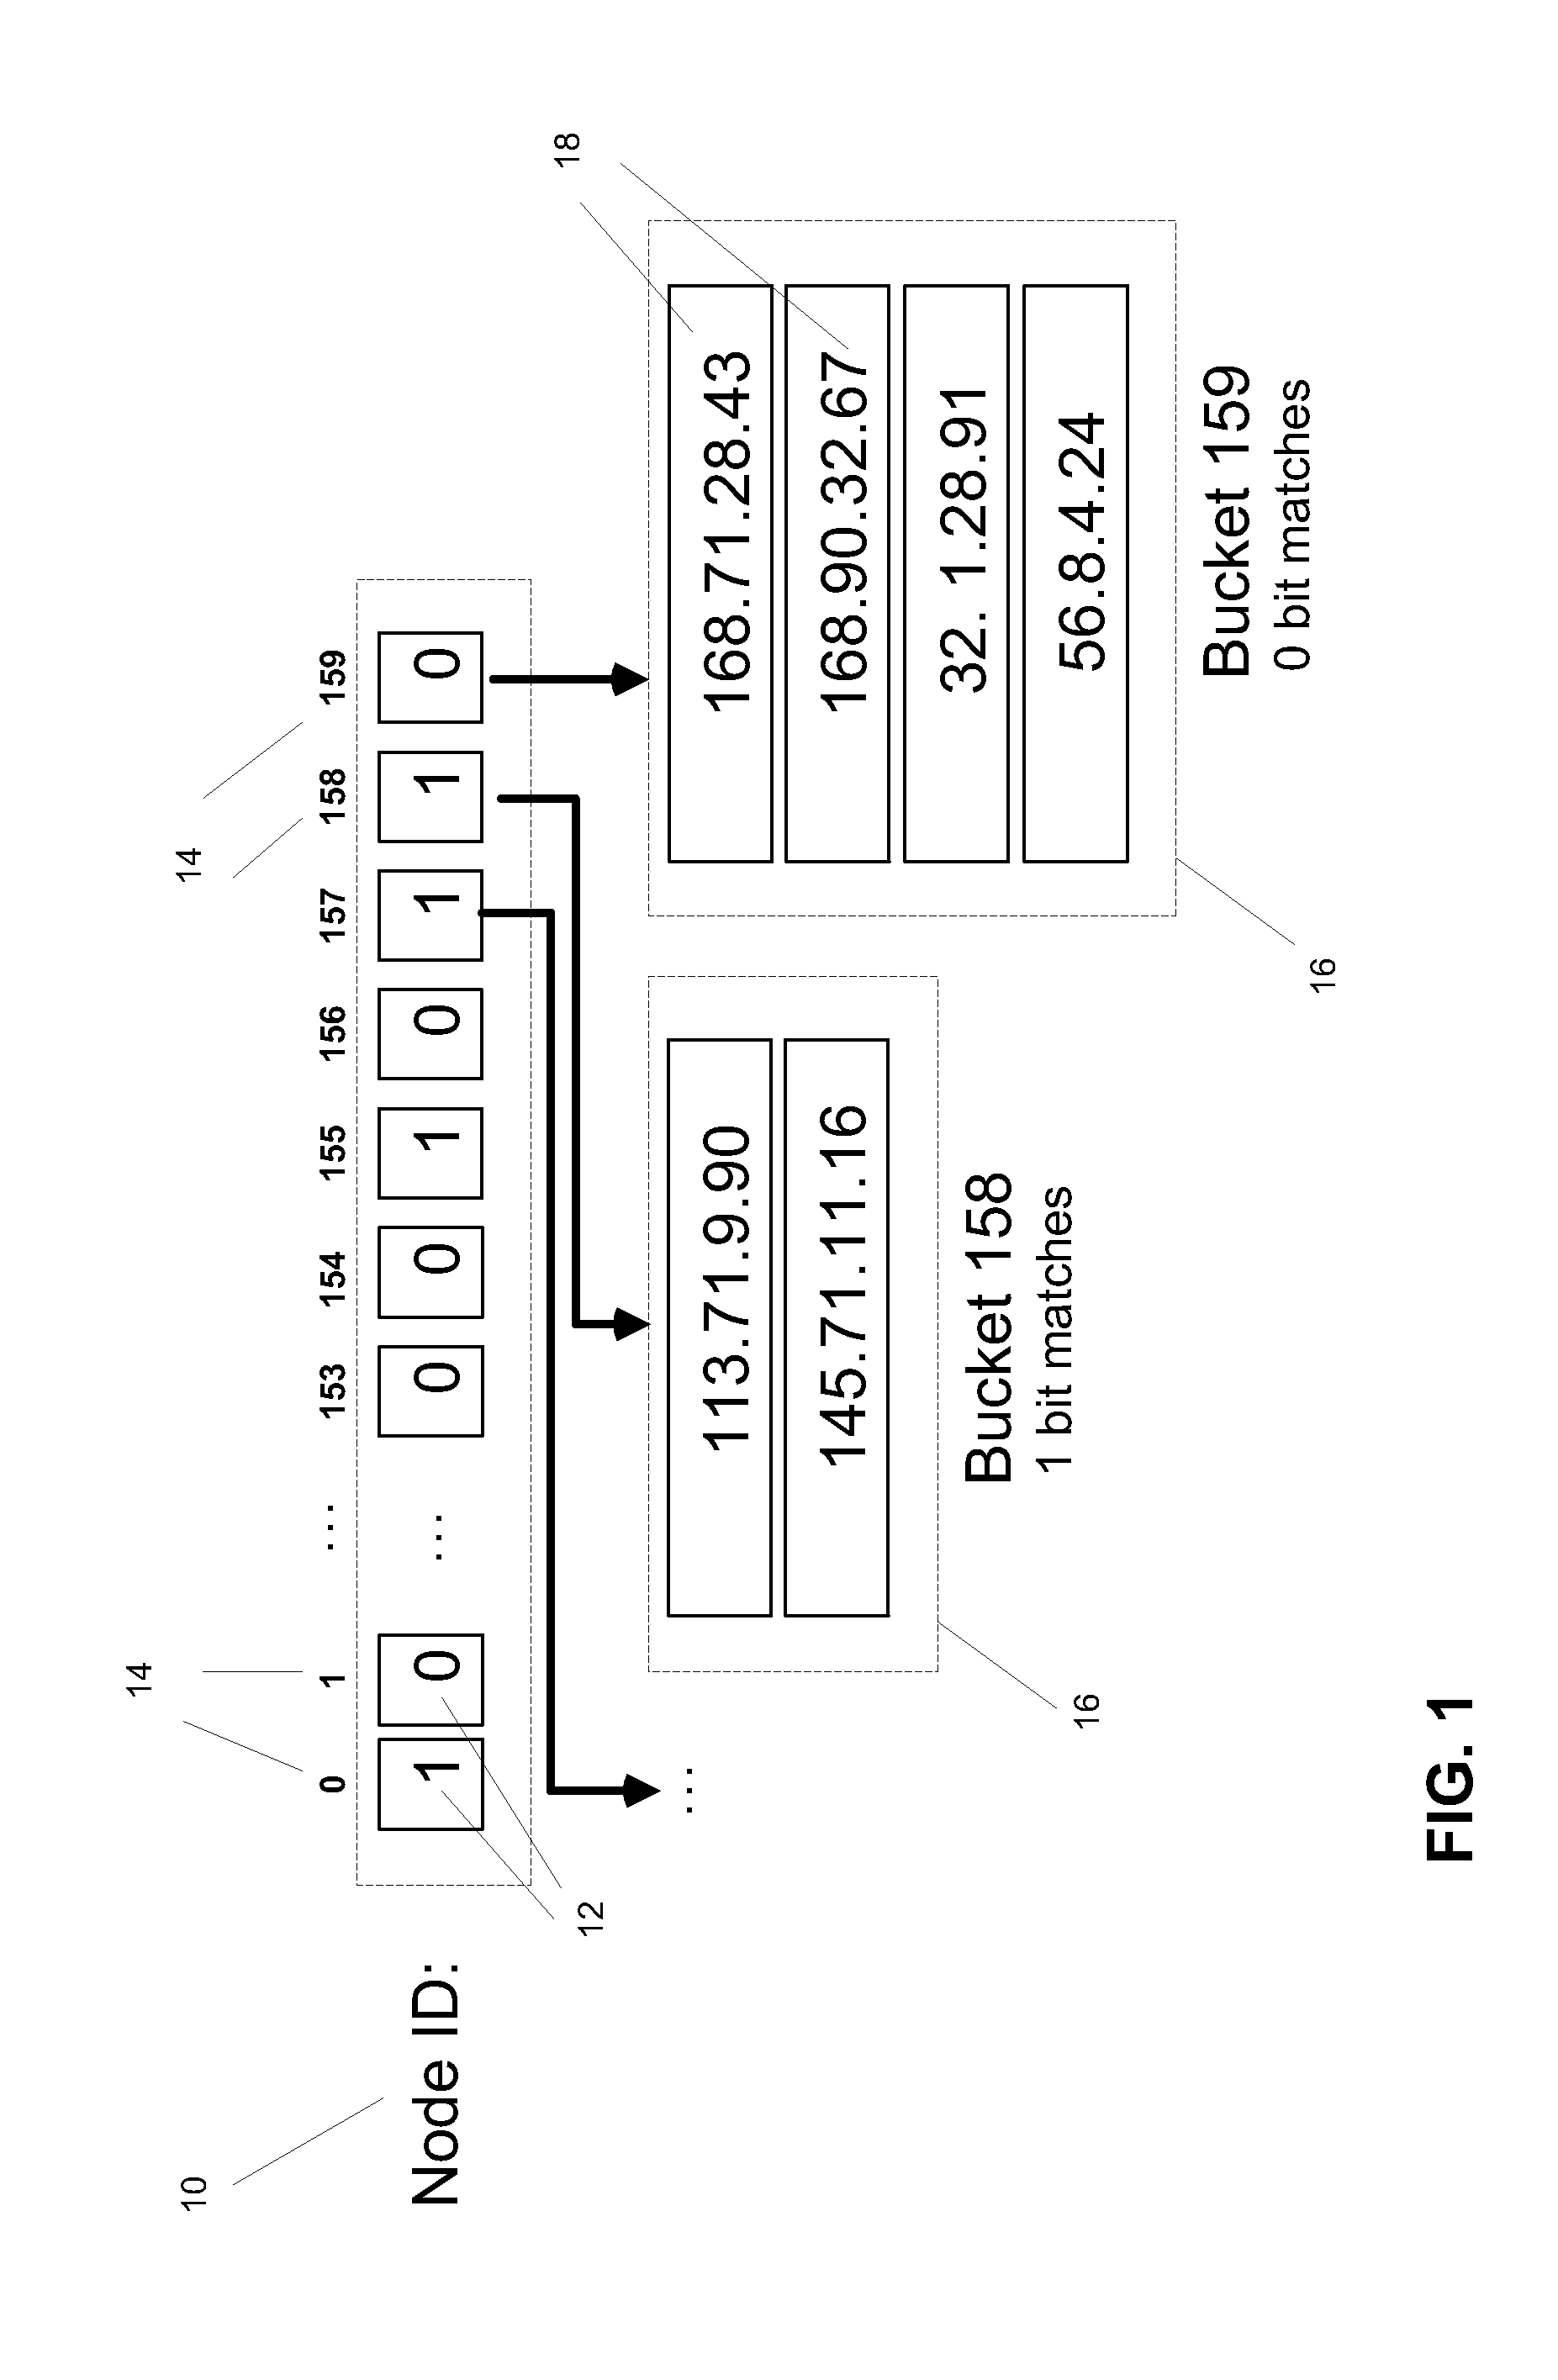 Method and deevice for network messaging